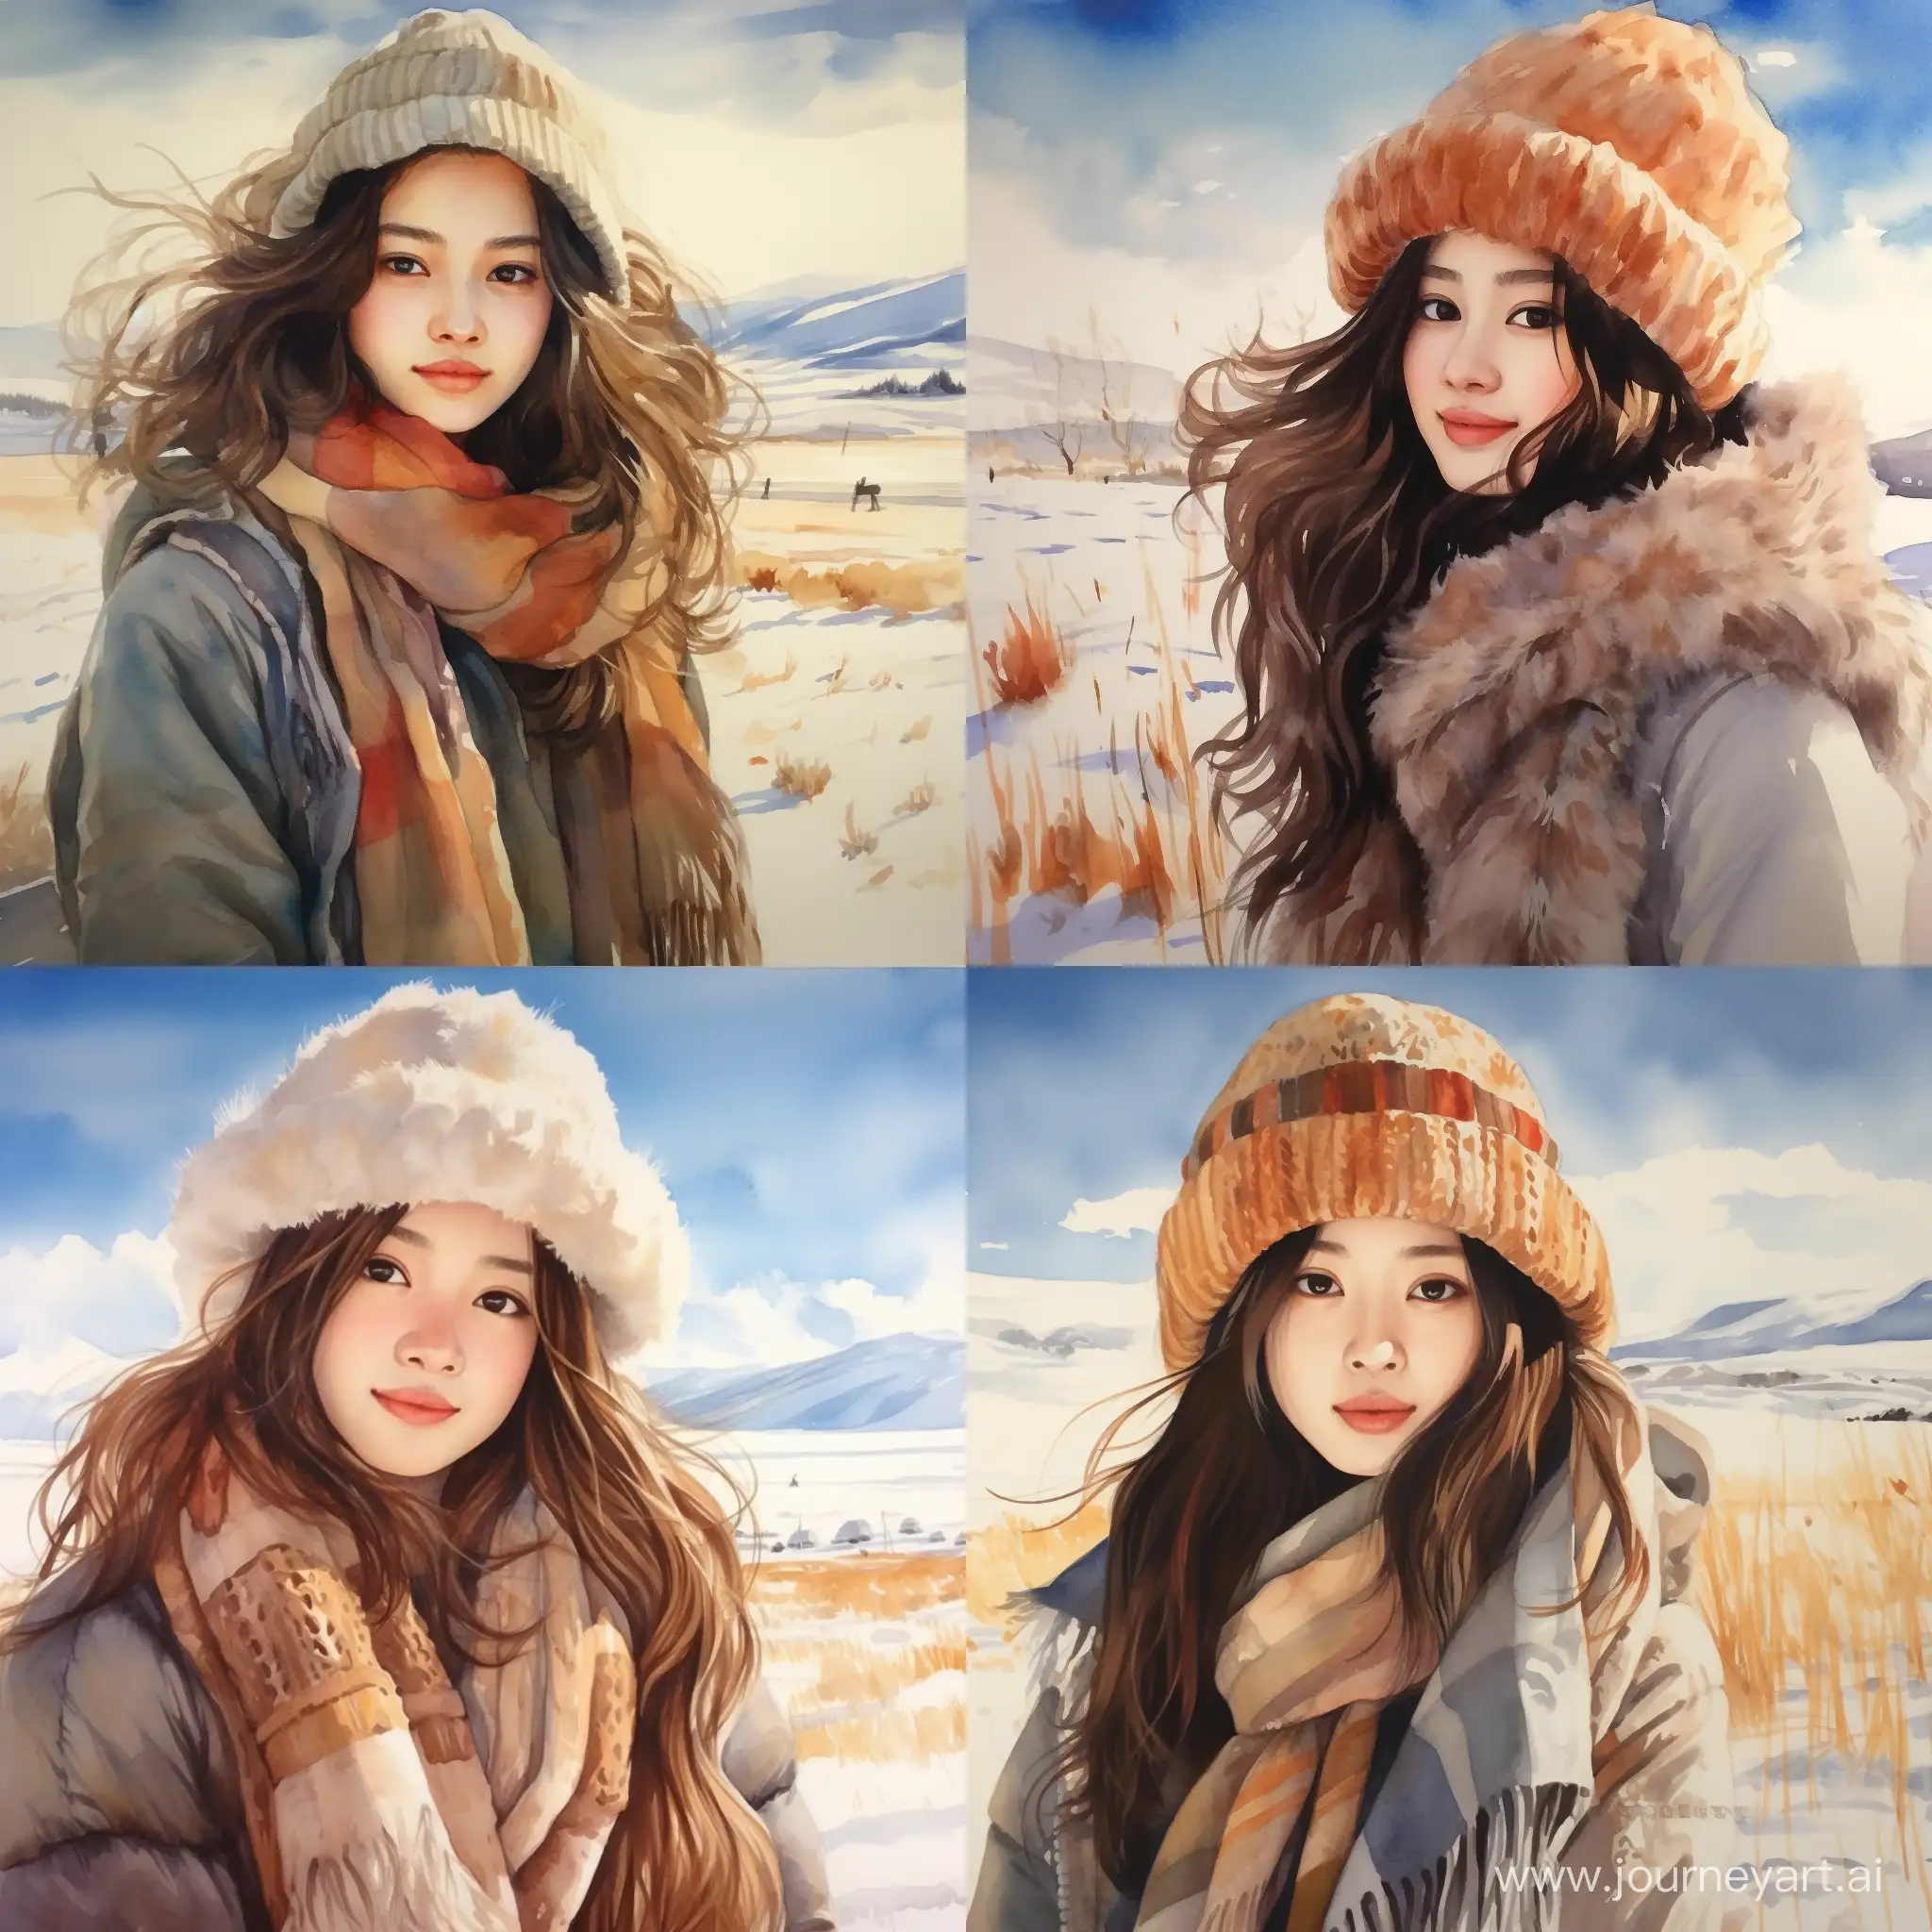 Radiant-Asian-Girl-in-Winter-Landscape-Joyful-Stroll-with-Watercolors-and-Ink